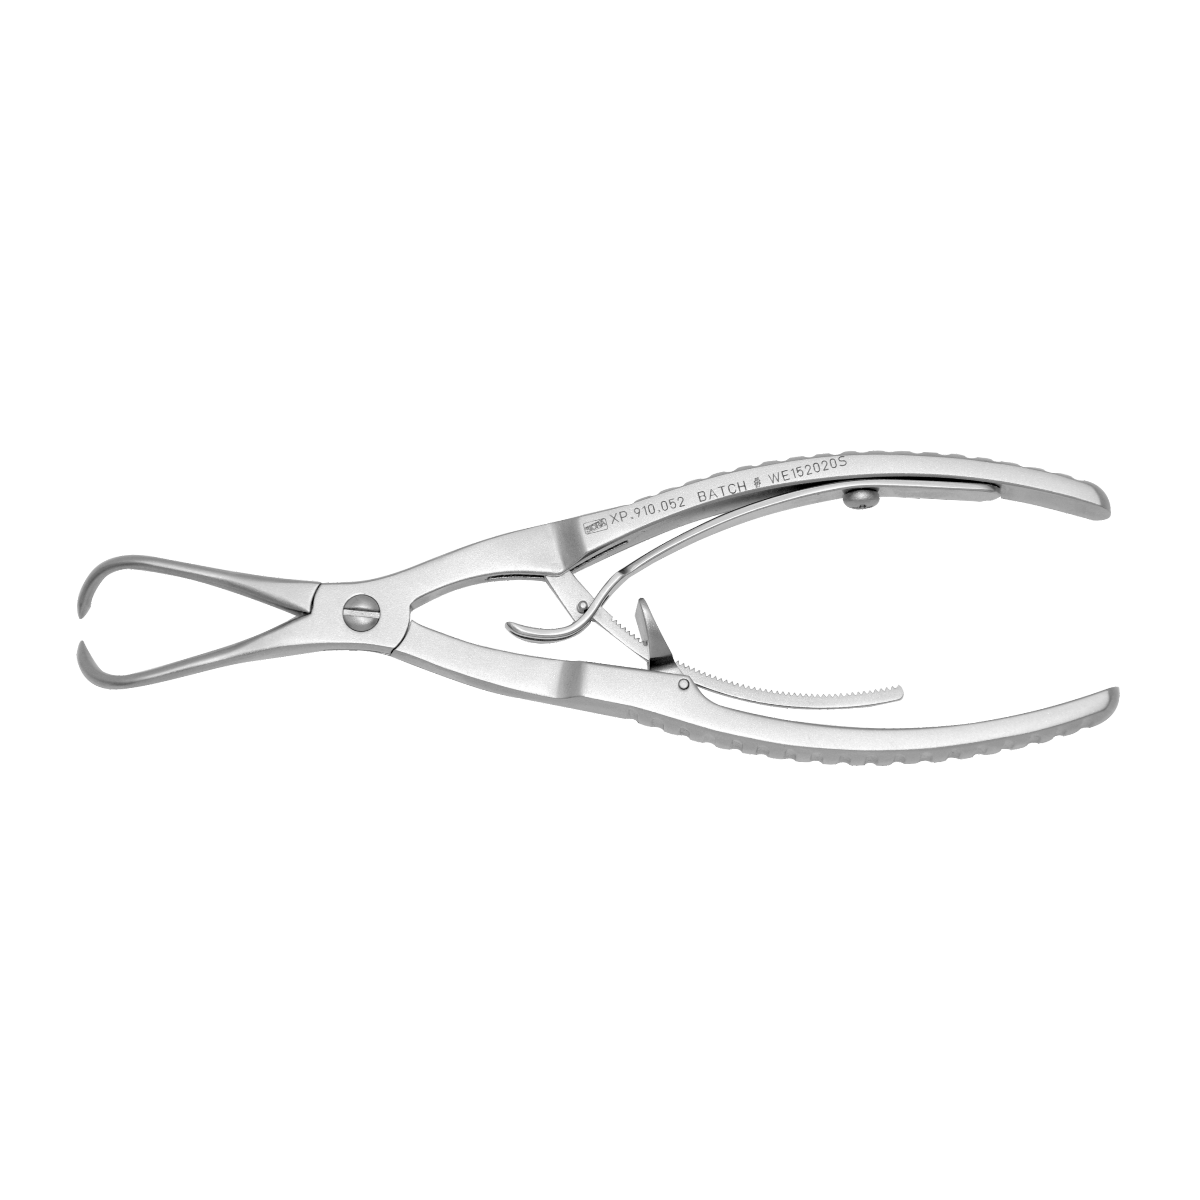 Reduction forceps With Pointed Soft Look-155mm